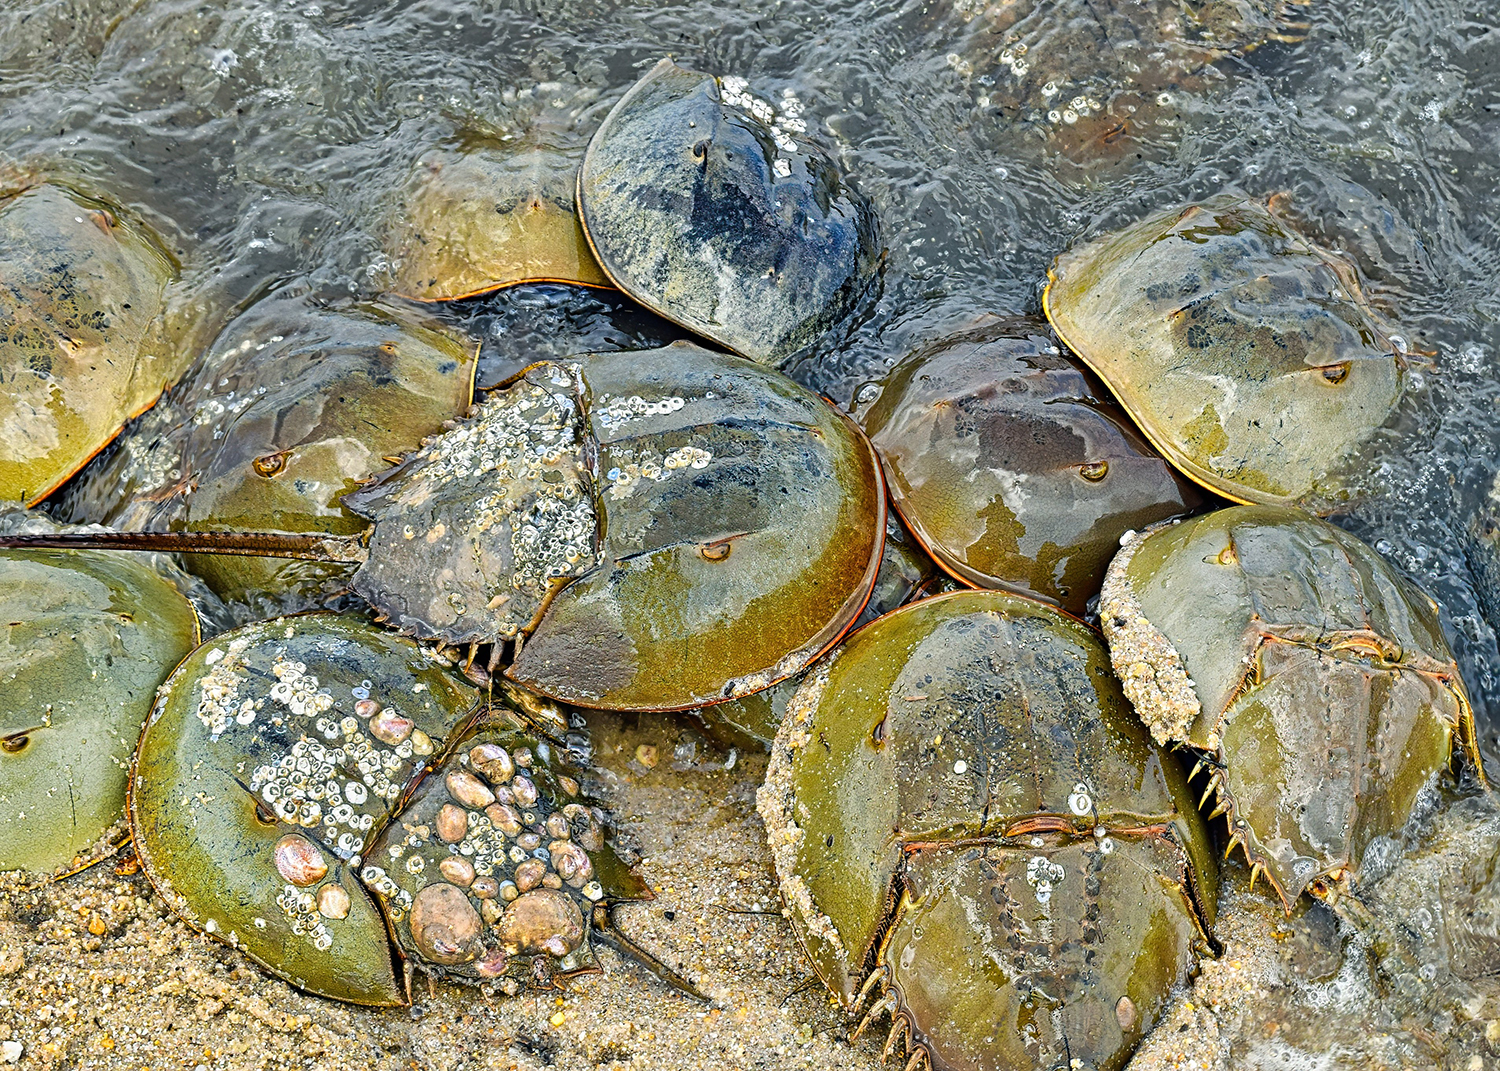 A host of organisms, such as barnacles, marine snails, and anemones, reside on horseshoe crab shells. Photo by Chris Engel